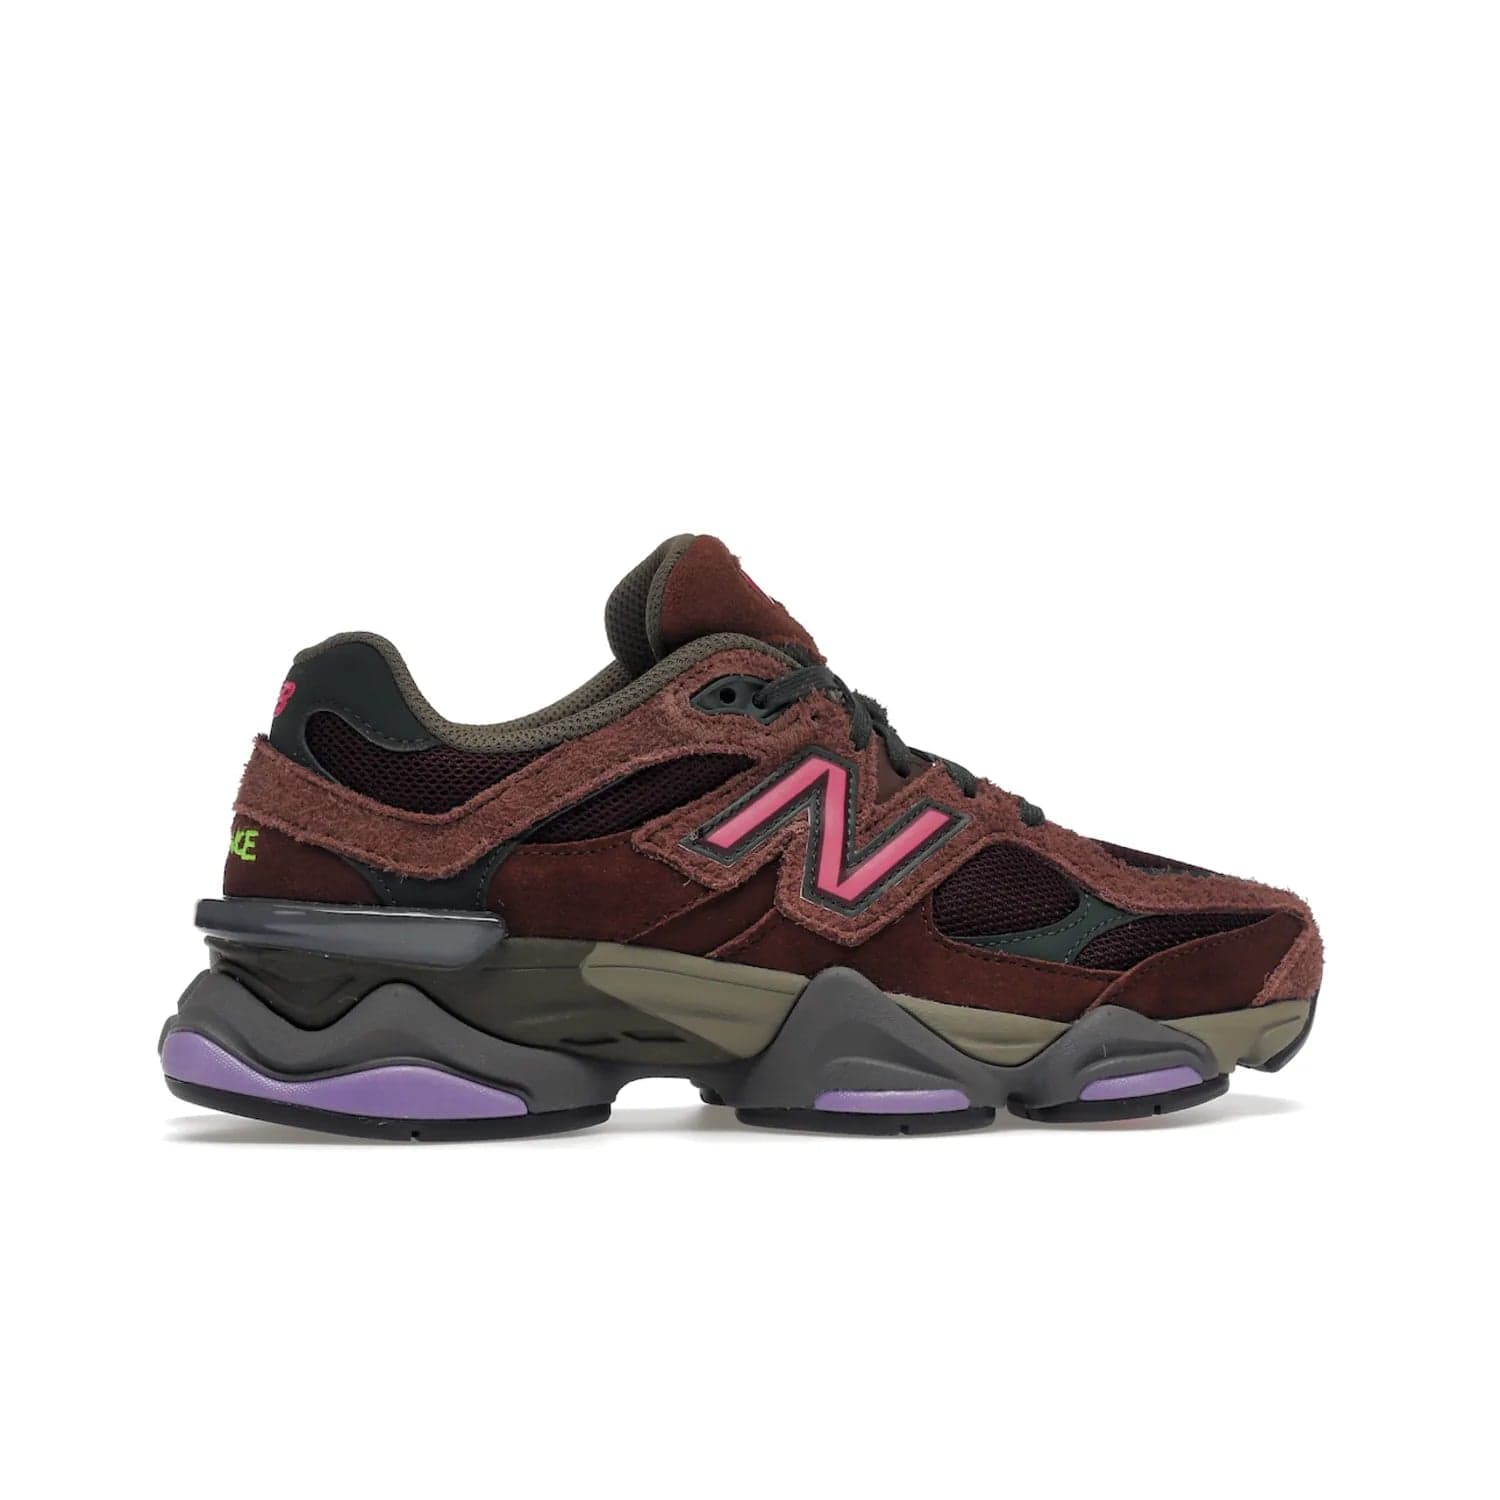 New Balance 9060 Rich Oak Burgundy - Image 36 - Only at www.BallersClubKickz.com - The New Balance 9060 is a stylish blend of performance and fashion. Featuring oak and burgundy hues, a durable upper, Fresh Foam cushioning and expanded rubber outsole, you’ll be looking and feeling great with every step. Available November 5th.